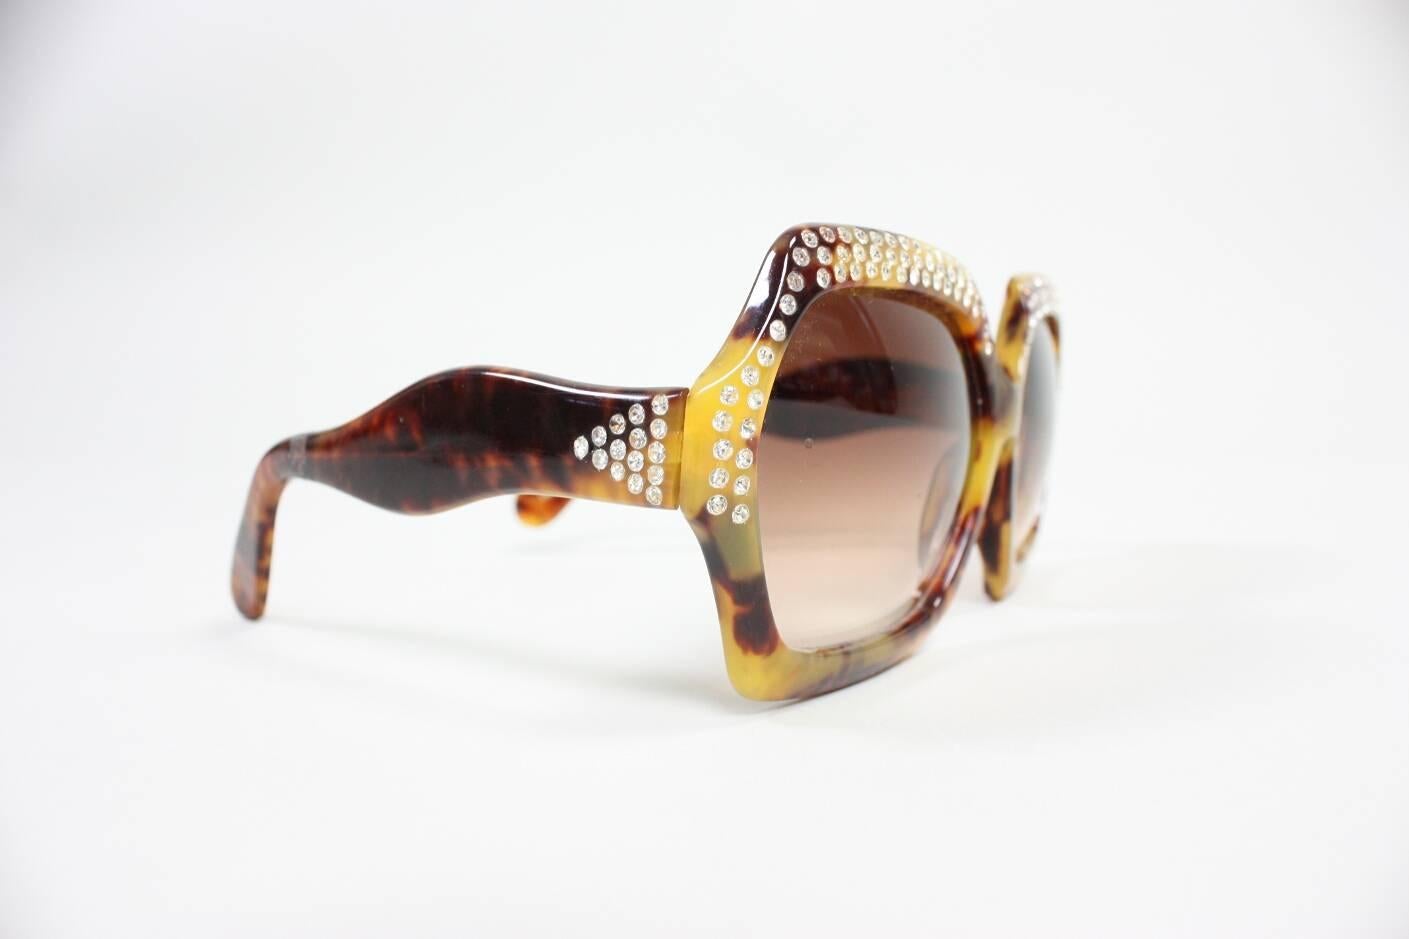 Vintage sunglasses from Pamela Designs are made of faux tortoise shell with rhinestones.

Condition: Excellent.

Measurements-

Frame Width: 6 1/2"
Frame Height: 2 3/4"
Arm Length: 5 1/4"